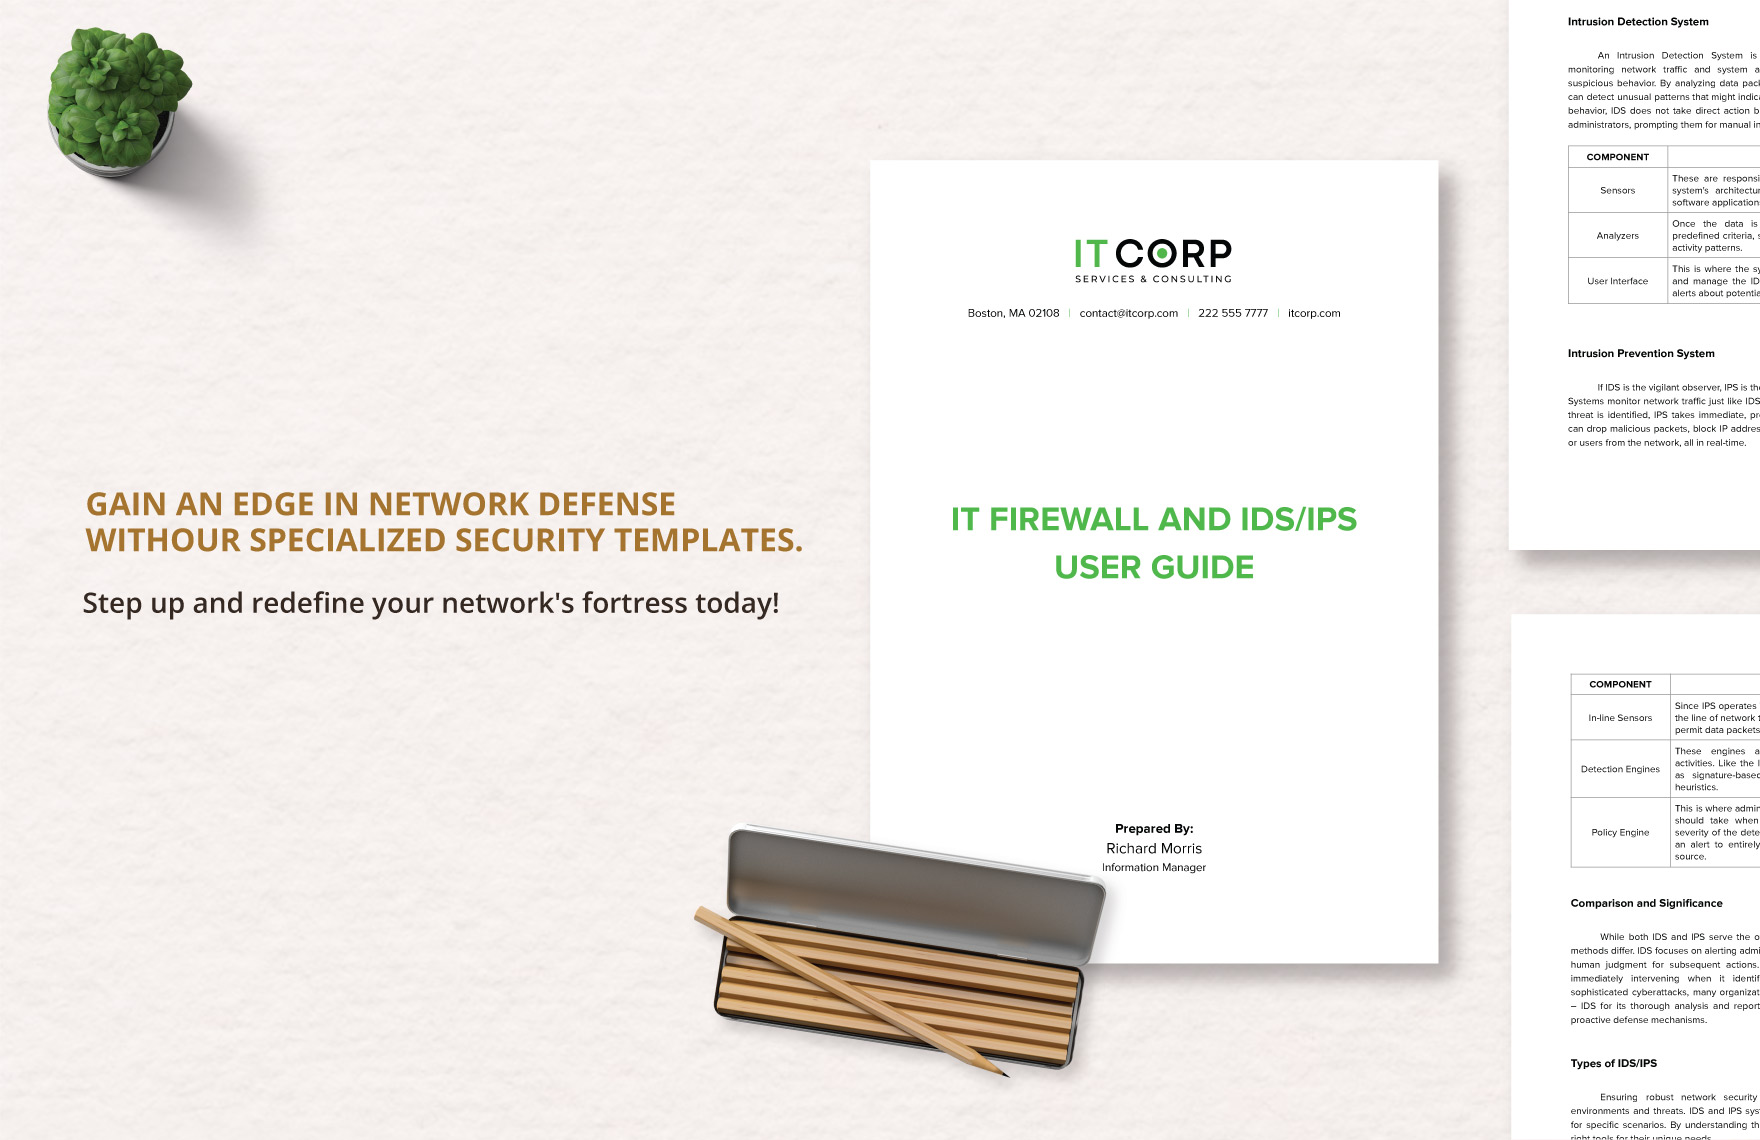 IT Firewall and IDS/IPS User Guide Template